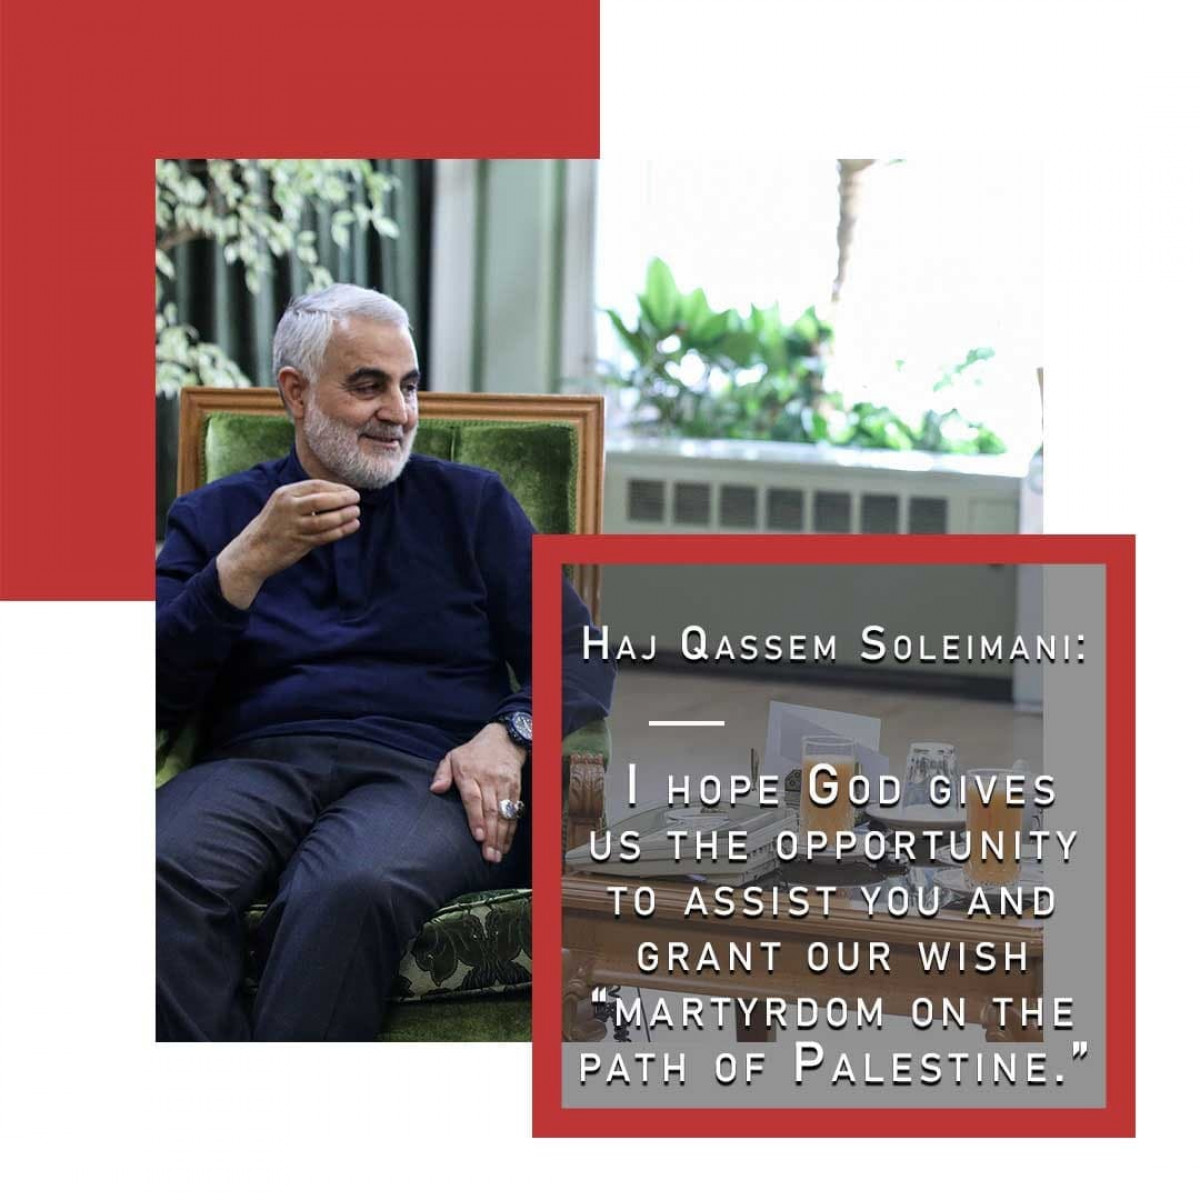 Haj Qassem Soleimani: I hope God gives us the opportunity to assist you and grant our wish “martyrdom on the path of Palestine.”